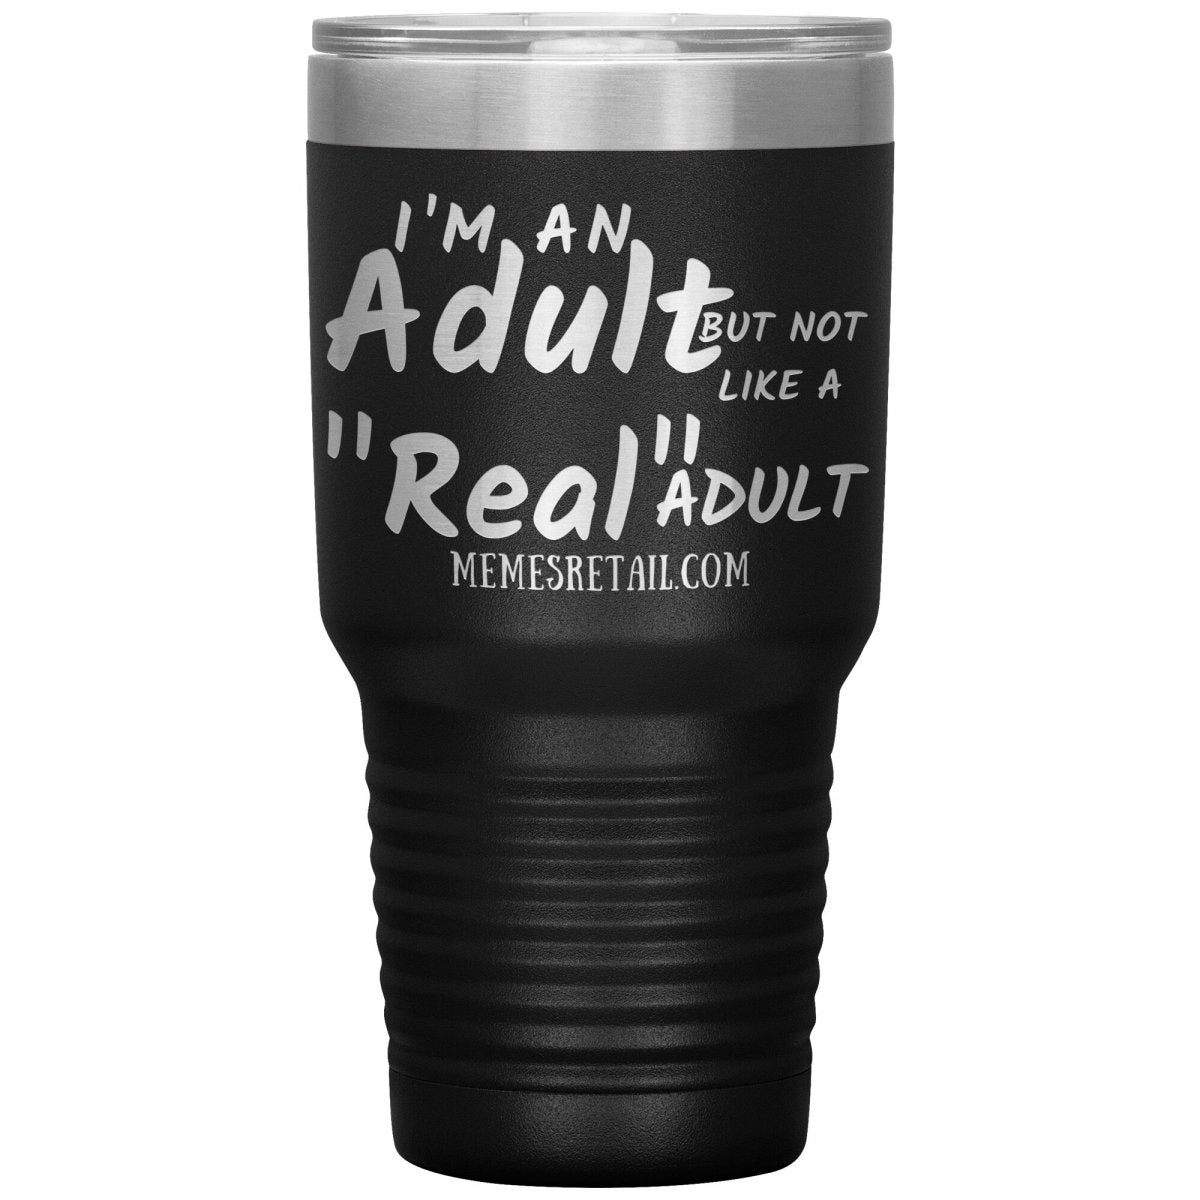 I'm an adult, but not like a "real" adult Tumblers, 30oz Insulated Tumbler / Black - MemesRetail.com